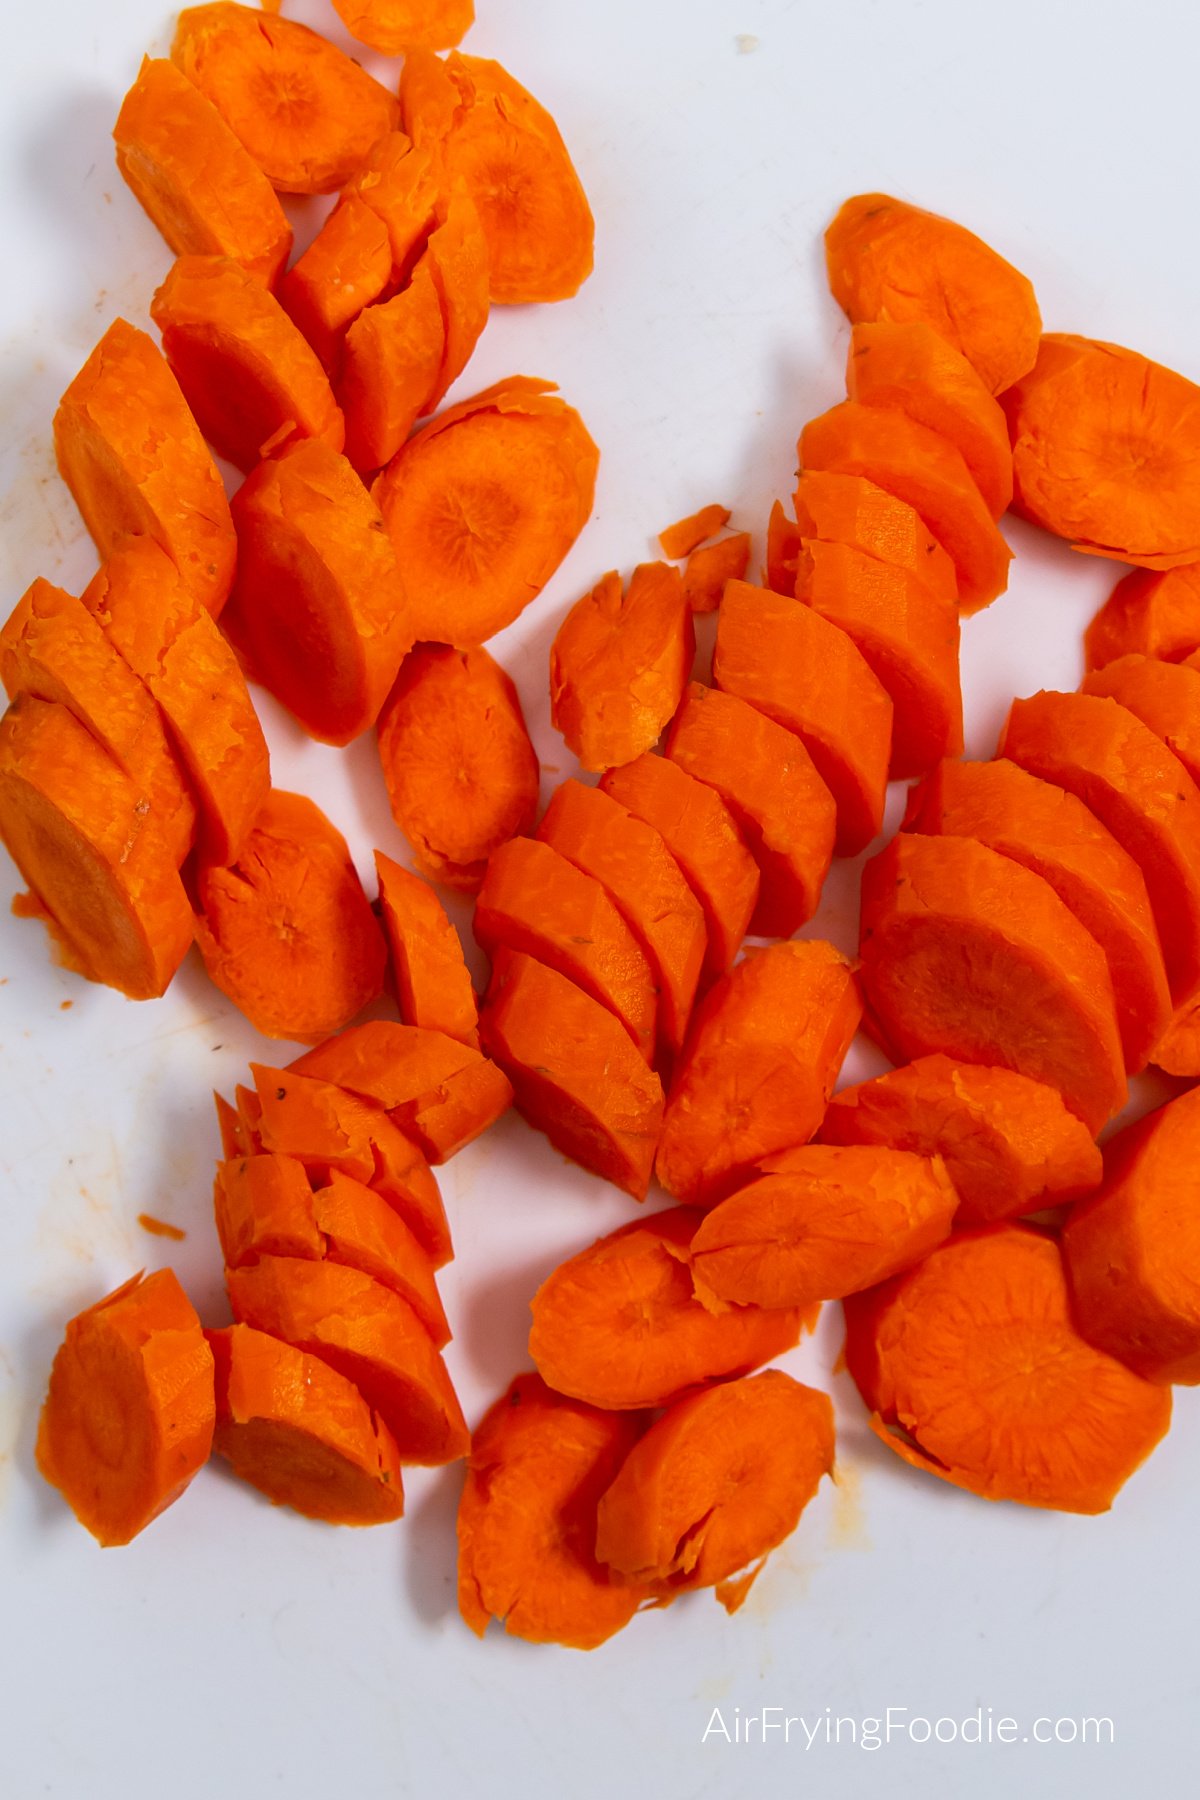 Carrots sliced into angles pieces.